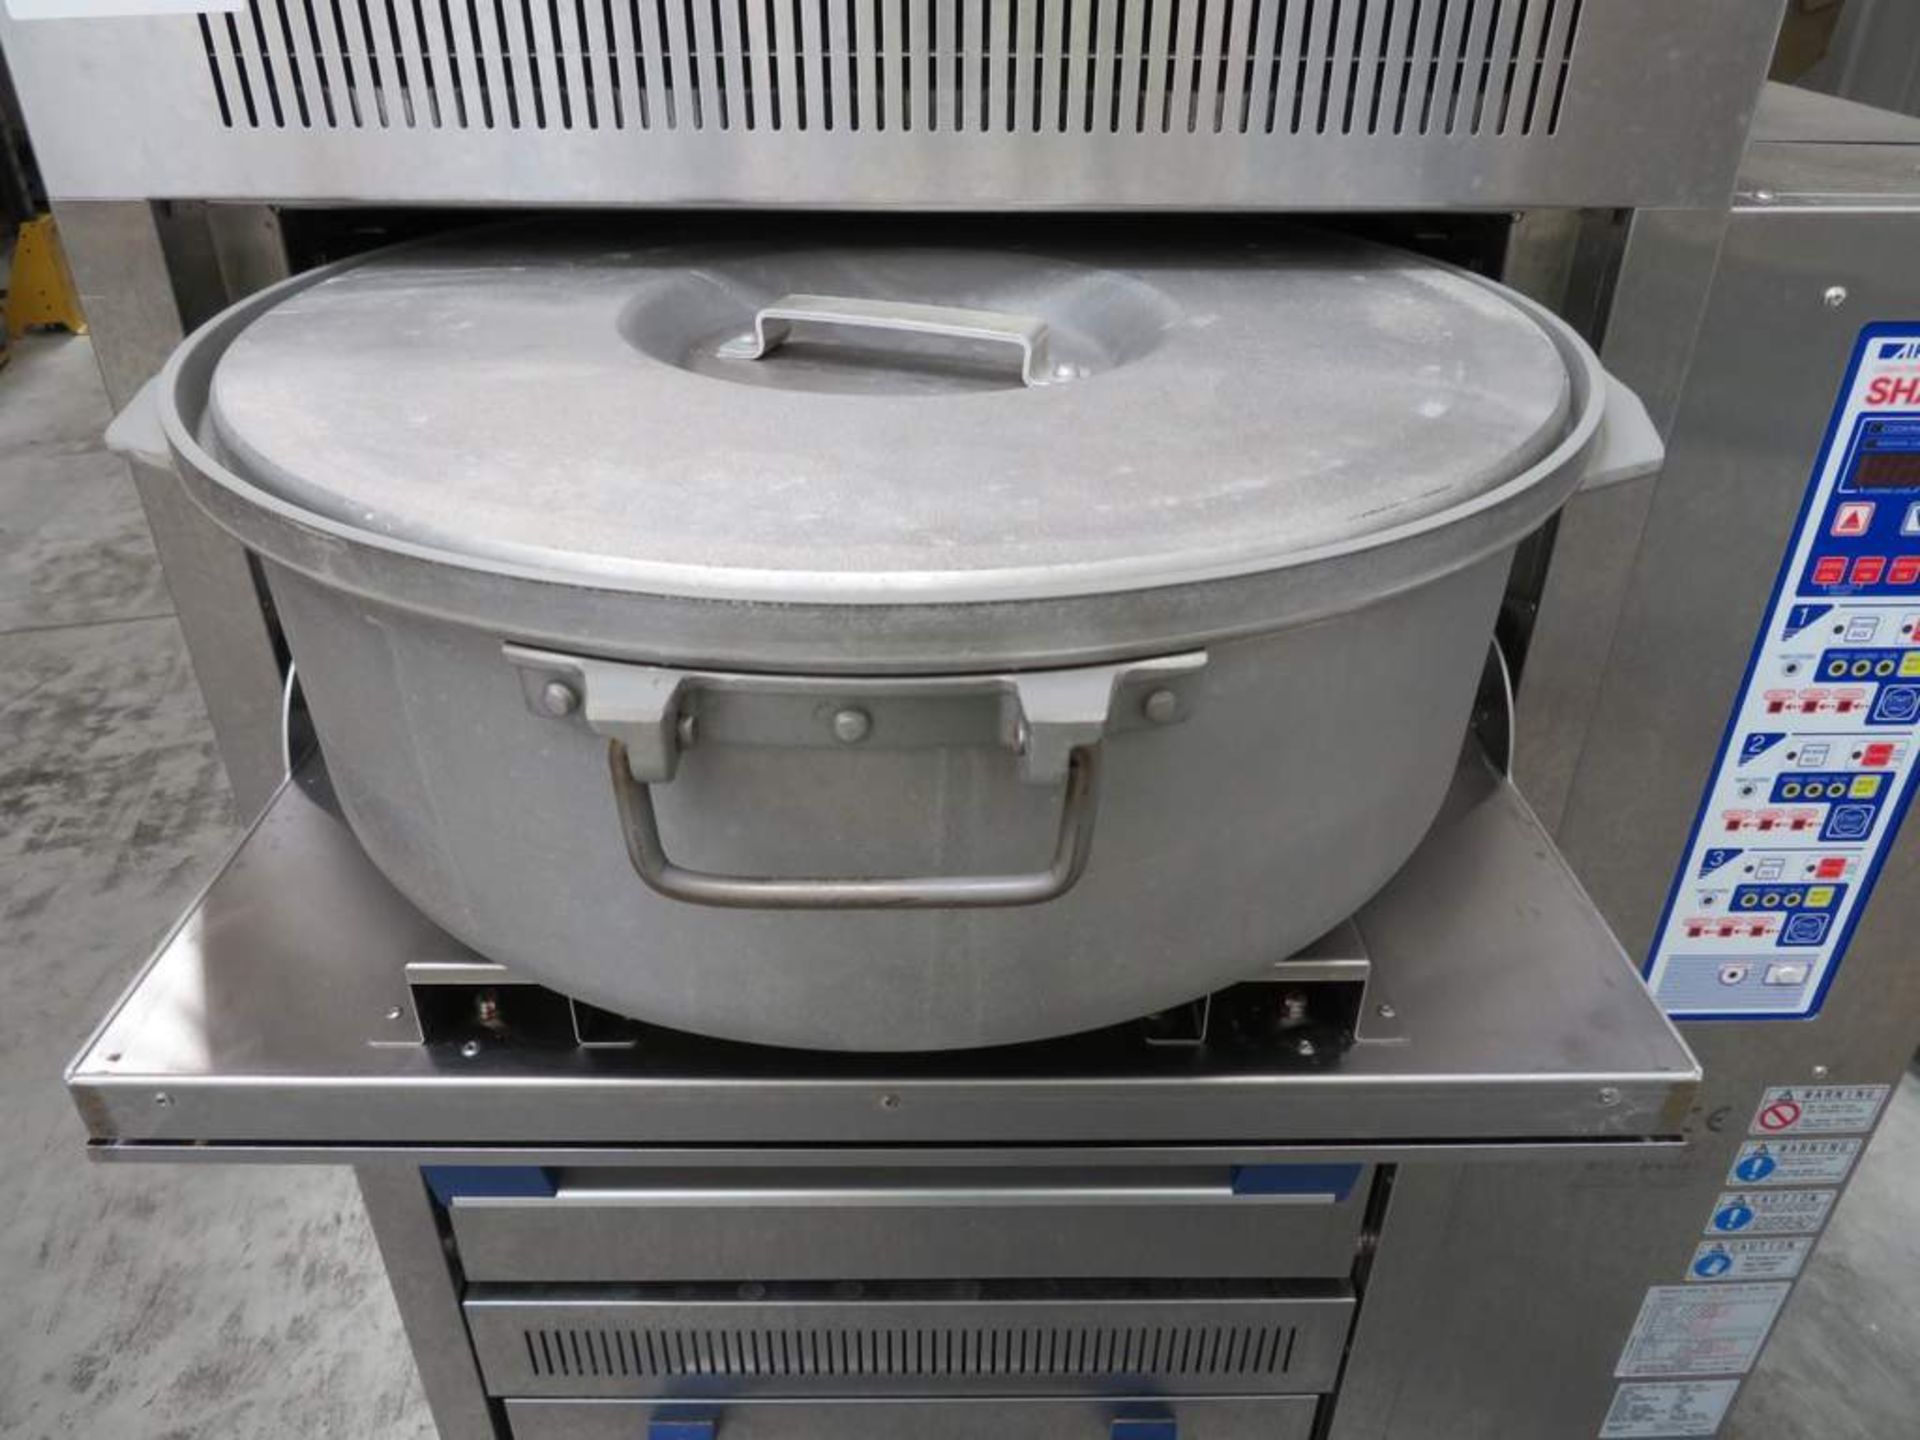 Sharipro computerized cabinet type rice cooker. Model: RMG-153R-SC - Image 6 of 7